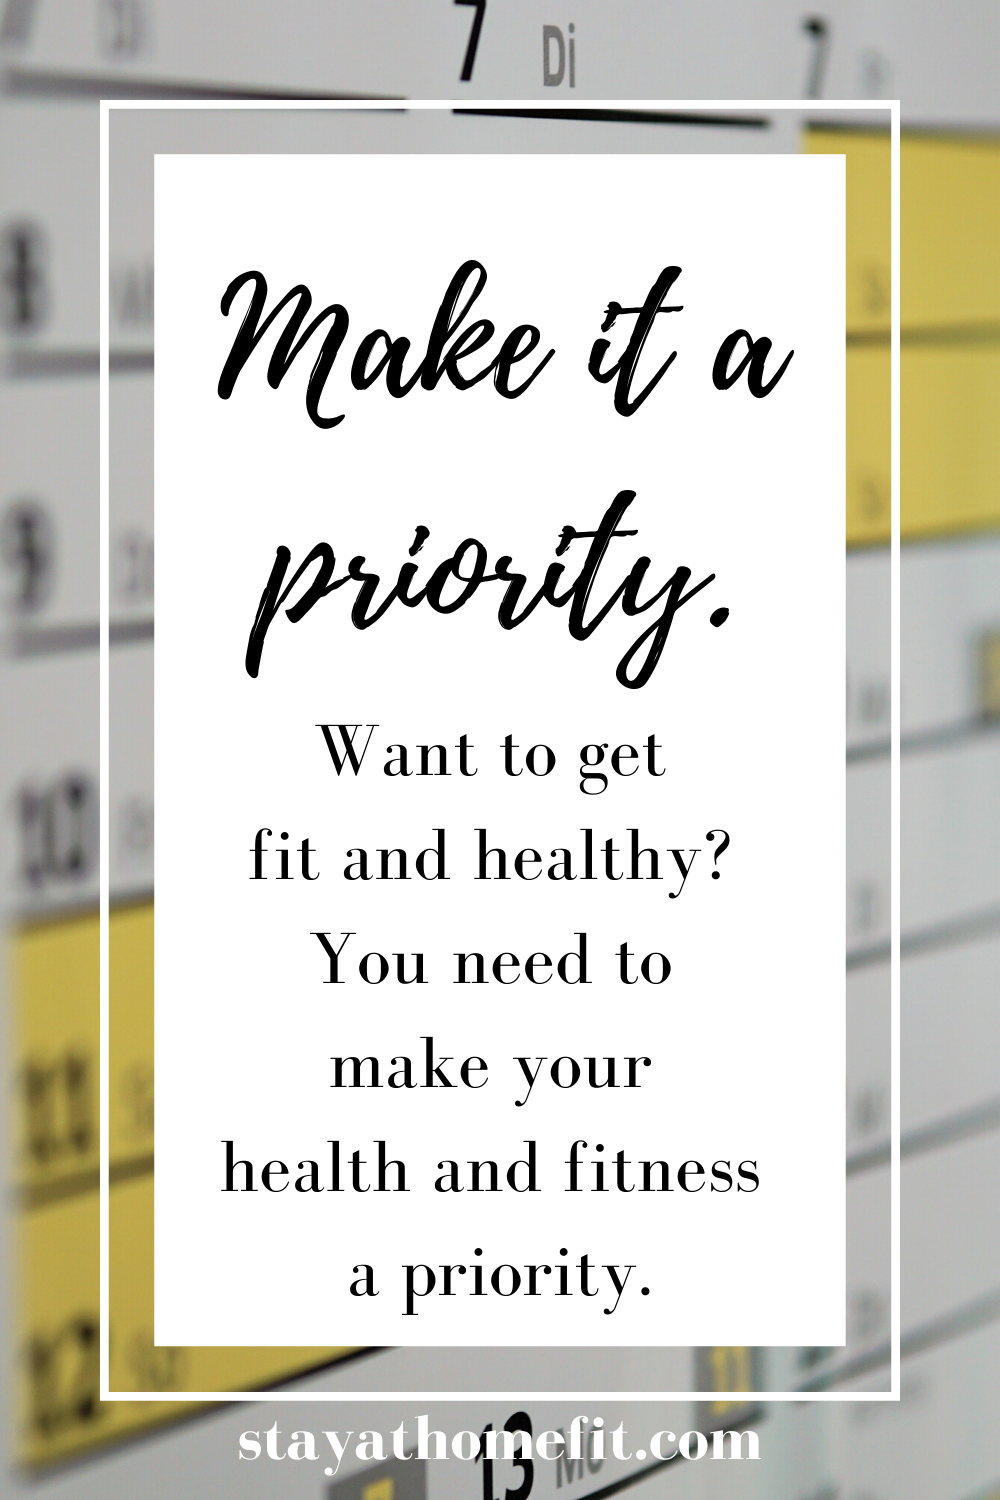 Make it a Priority